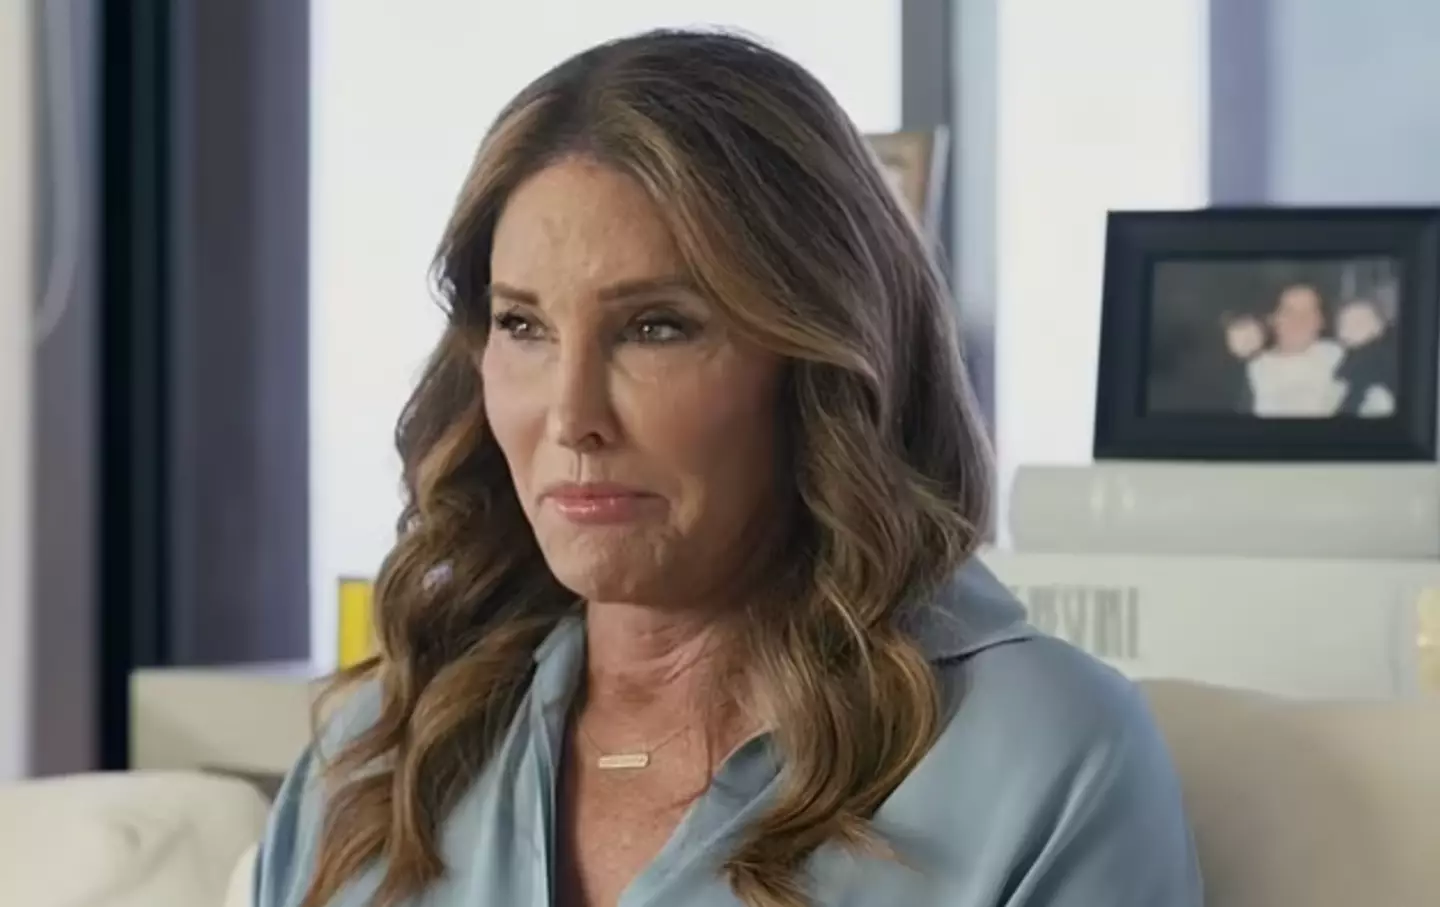 Caitlyn was interviewed about the family as part of the House of Kardashians documentary (Sky)